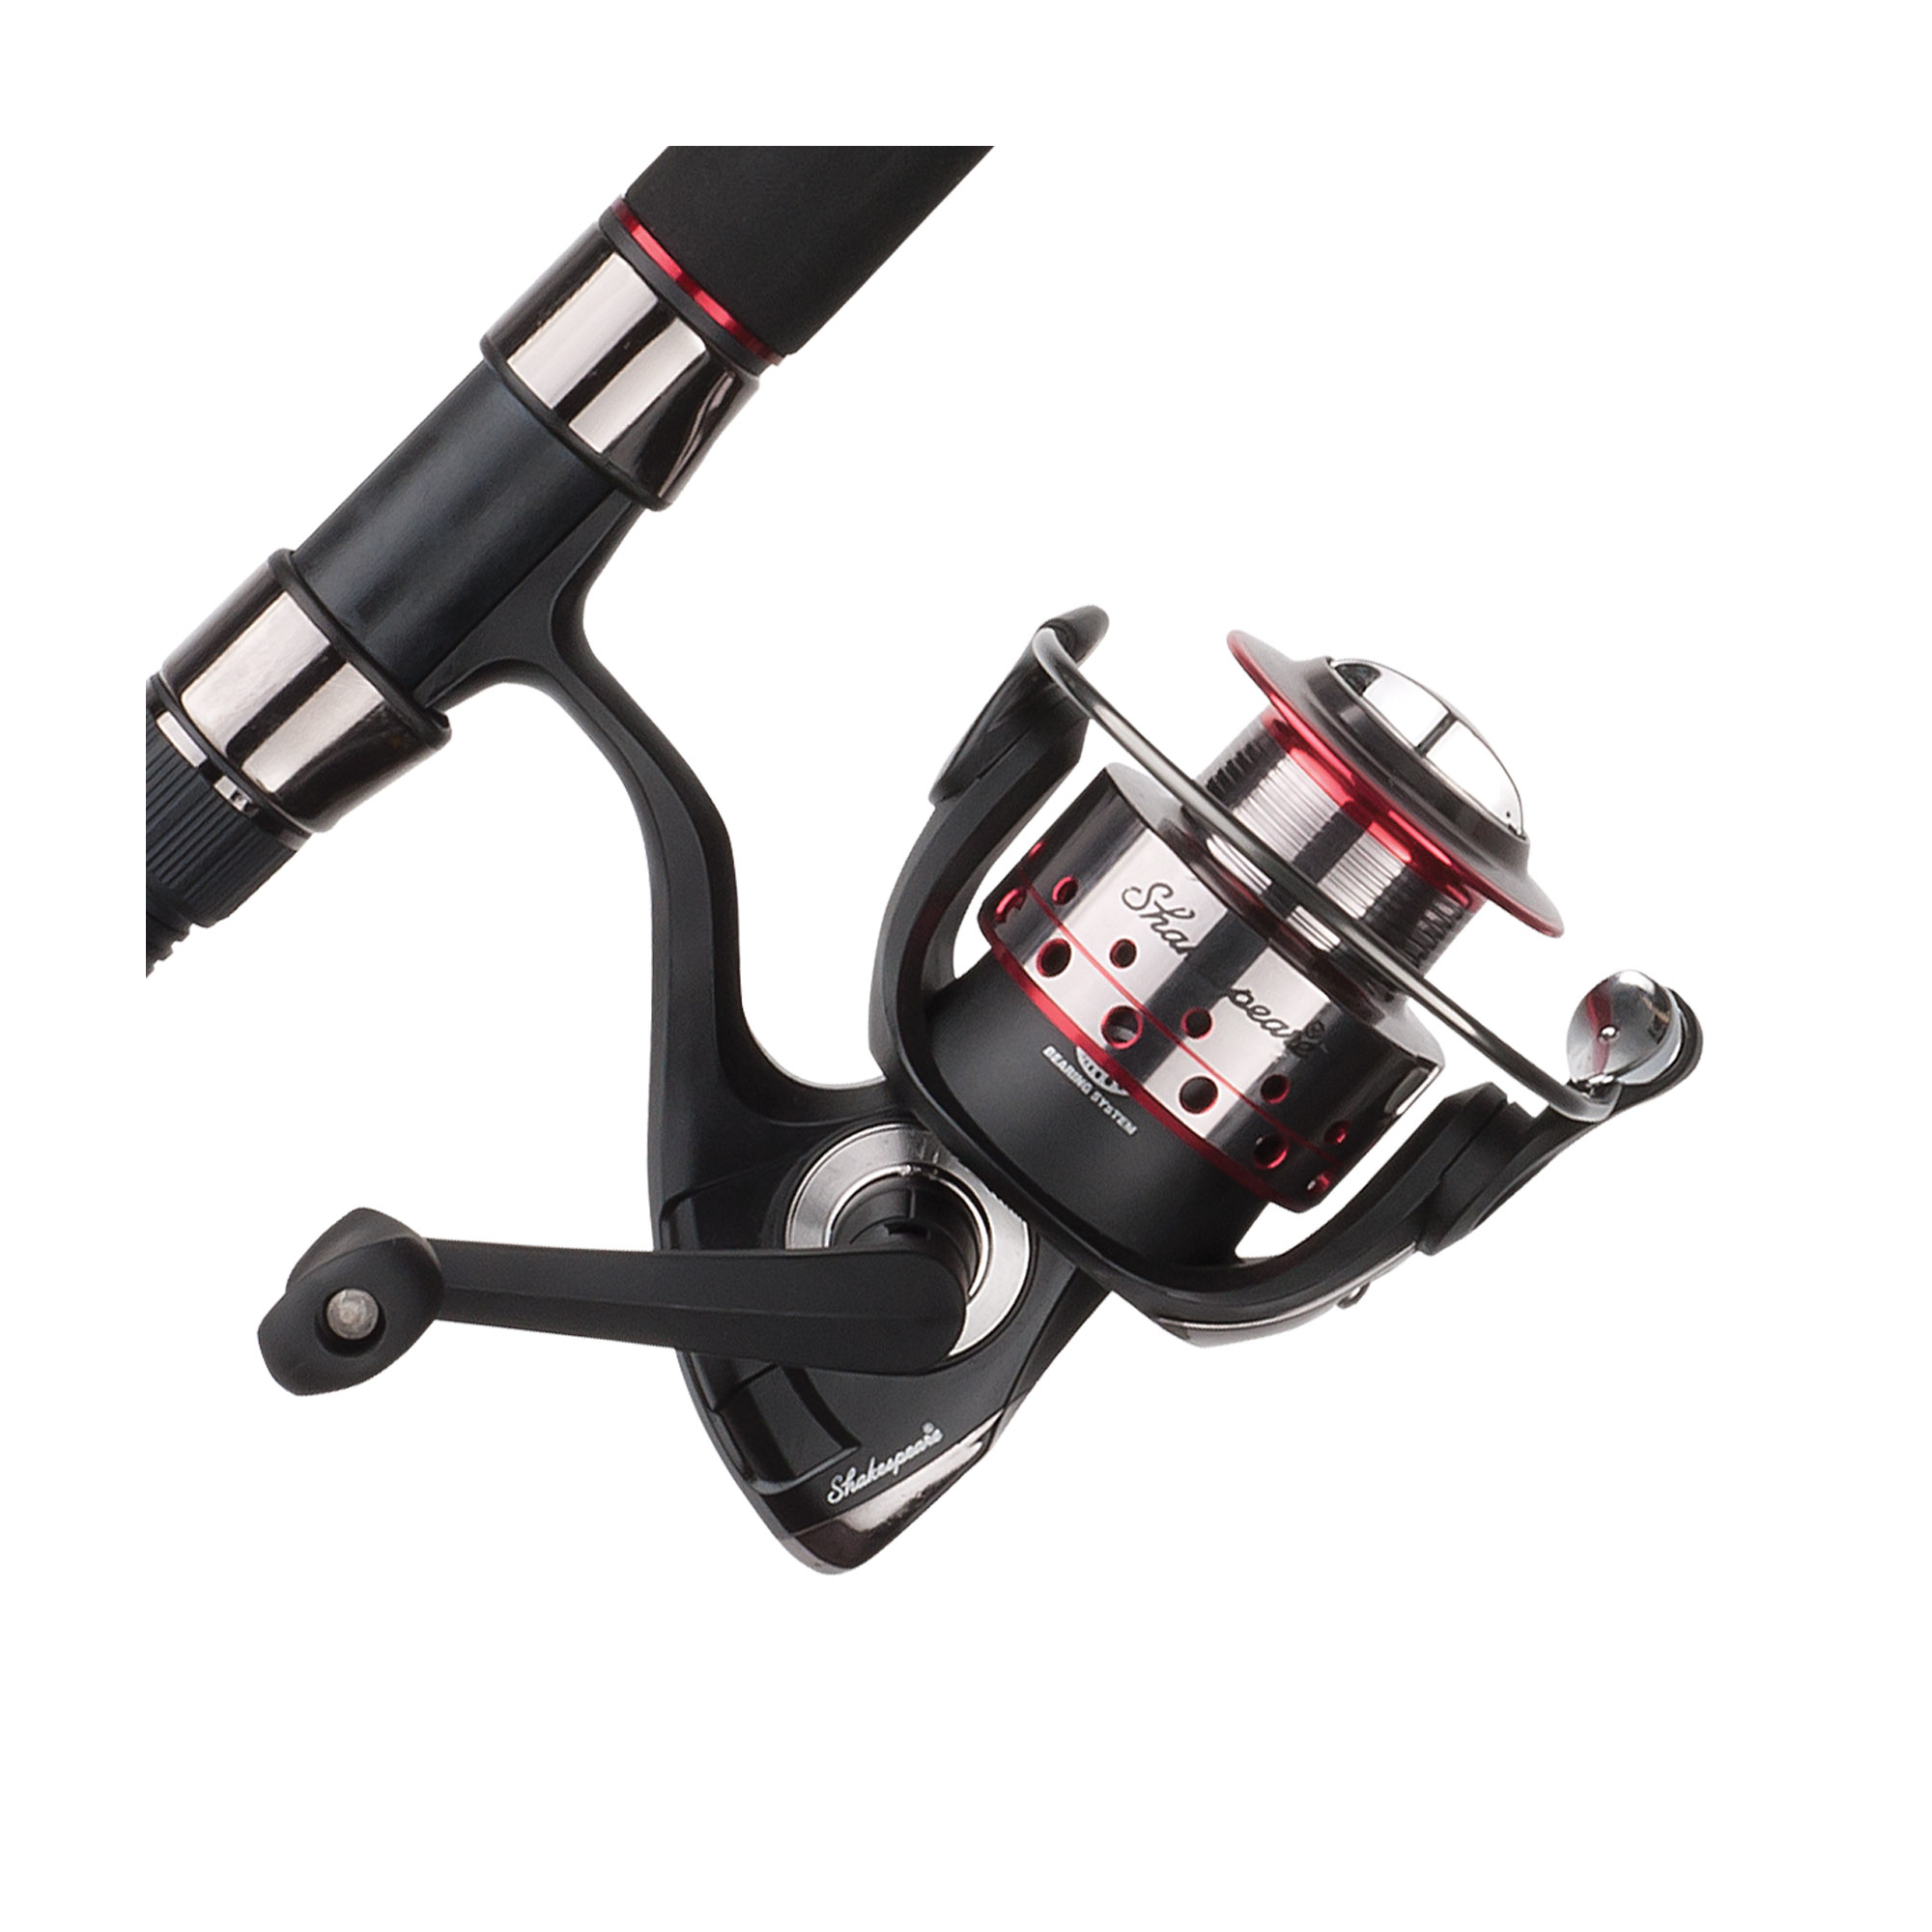 Shakespeare Ugly Stik GX2 Spinning Reel and Fishing Rod Combo thebookongonefishing on sale for a limited time for $44.99 buy today! thebookongonefishing